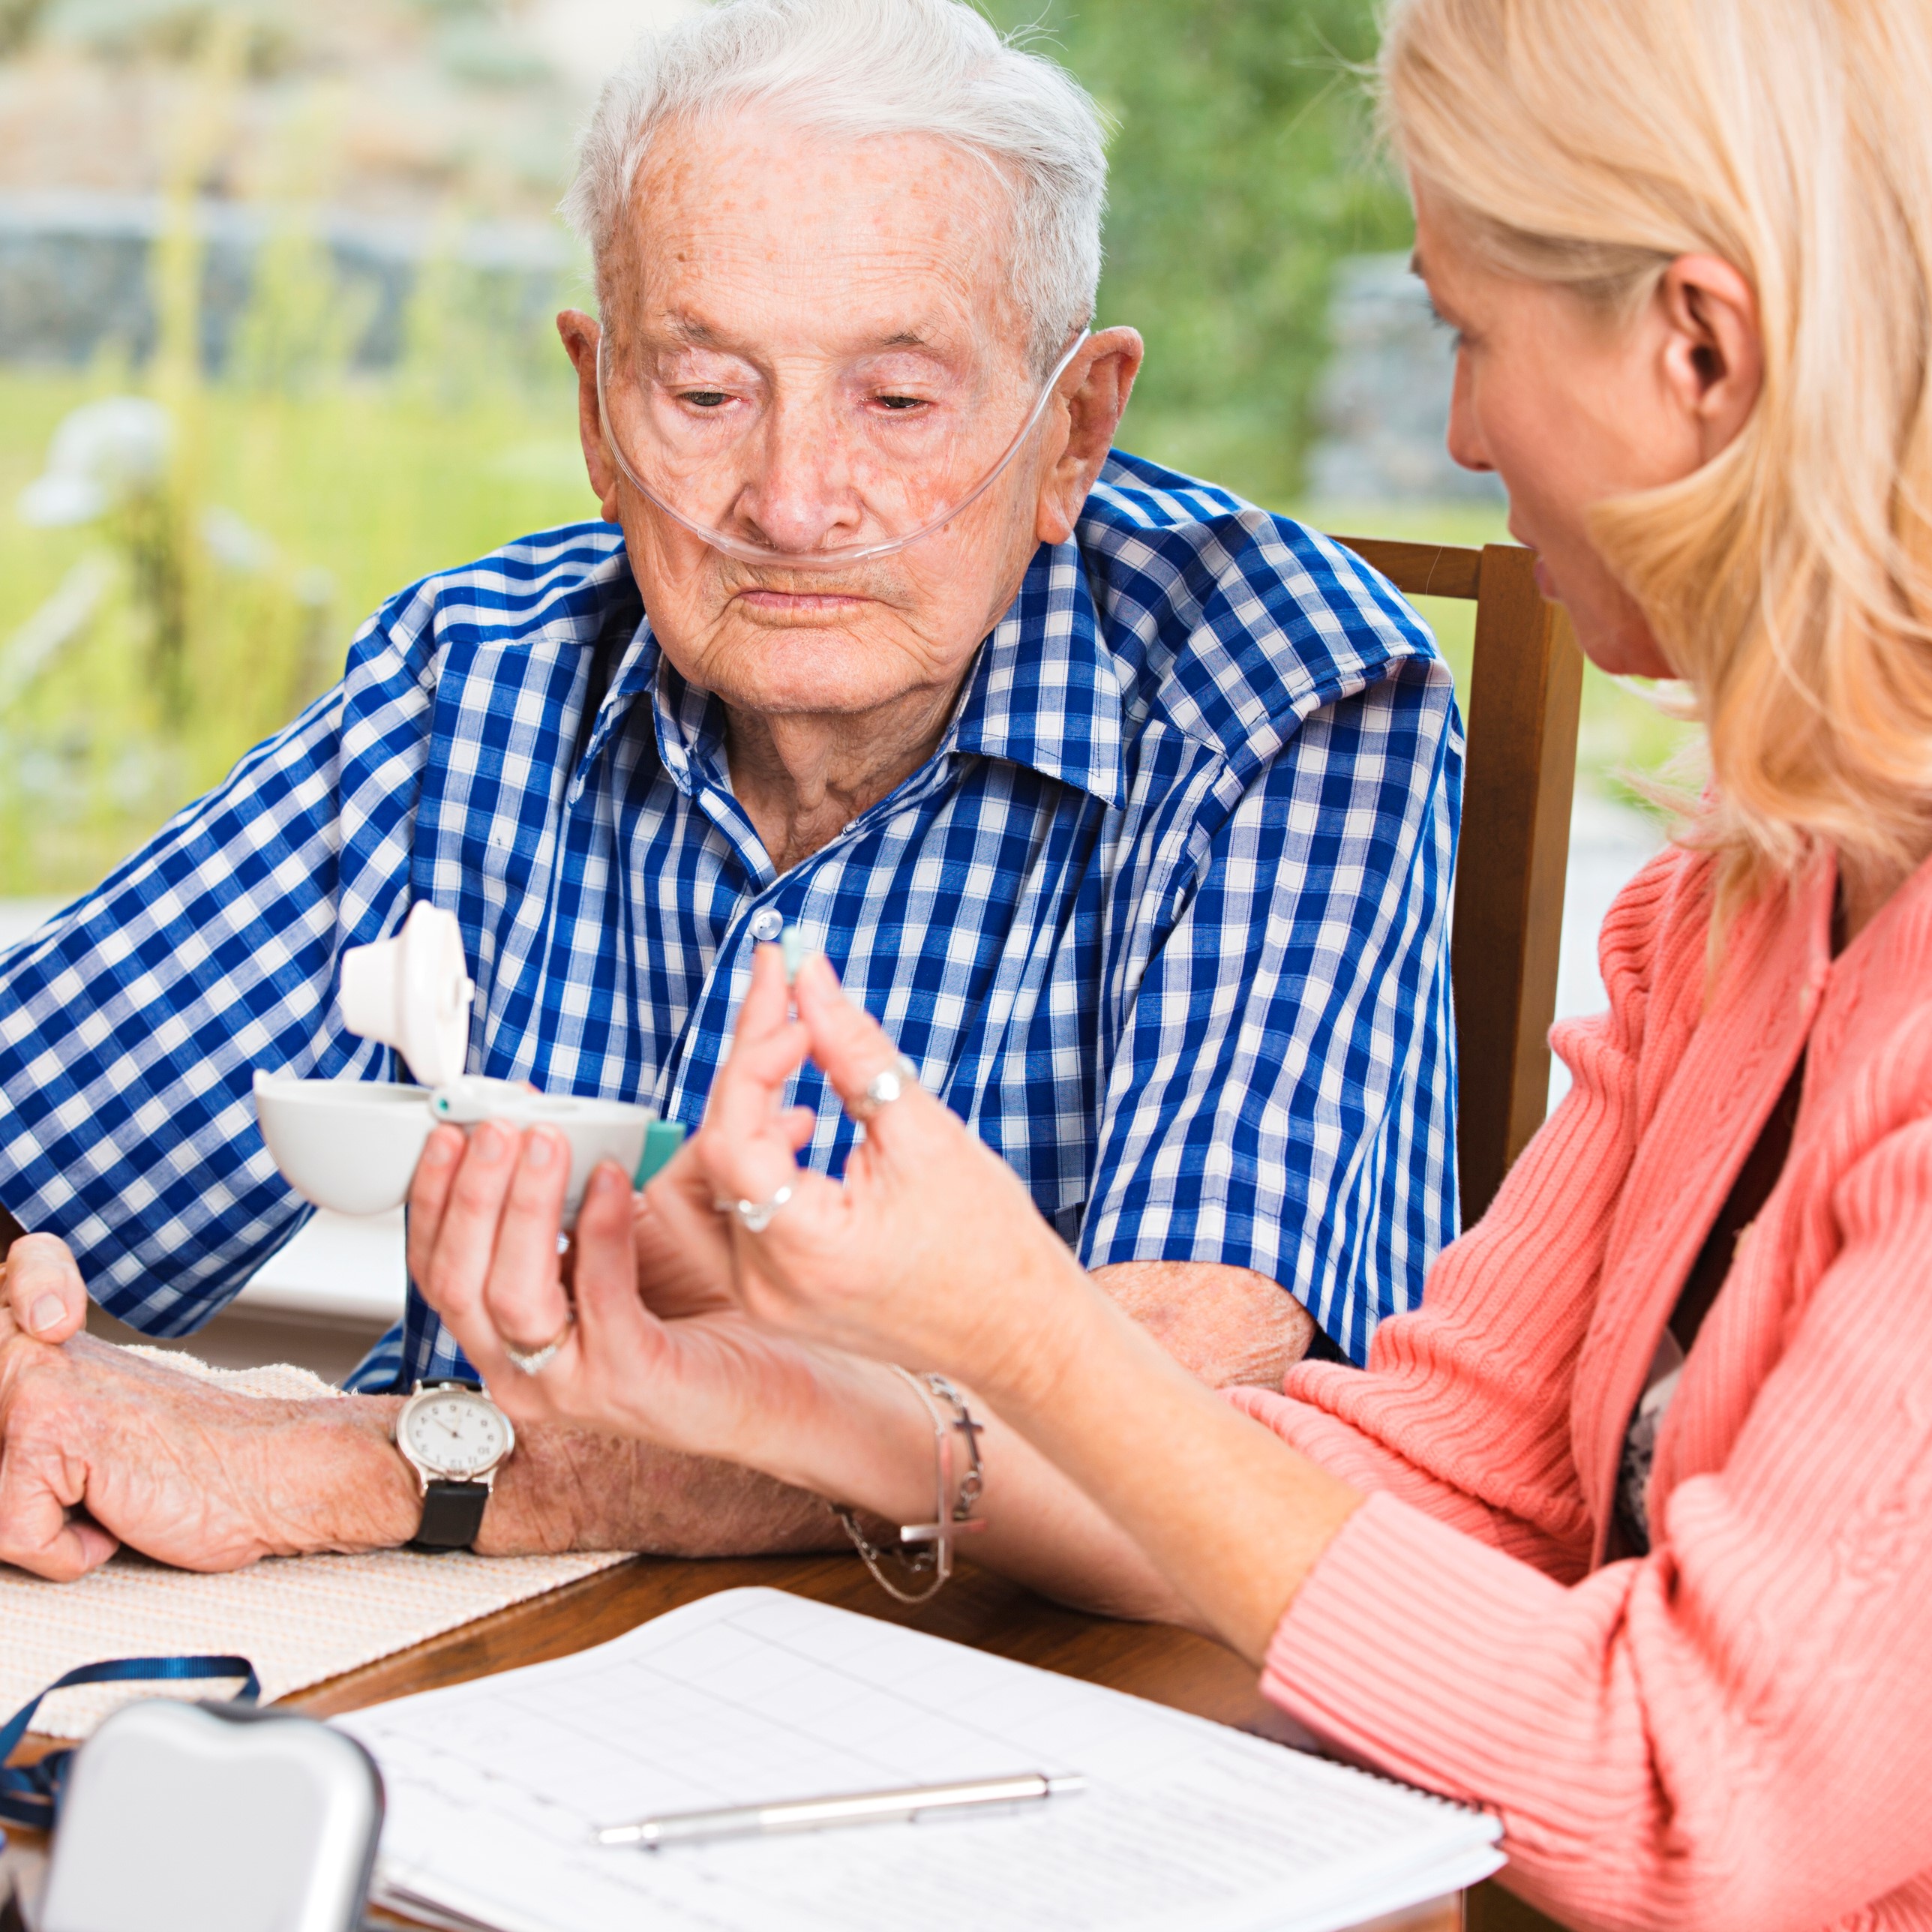 Elderly man sits at a table with a woman. She is showing him the details of his medication.